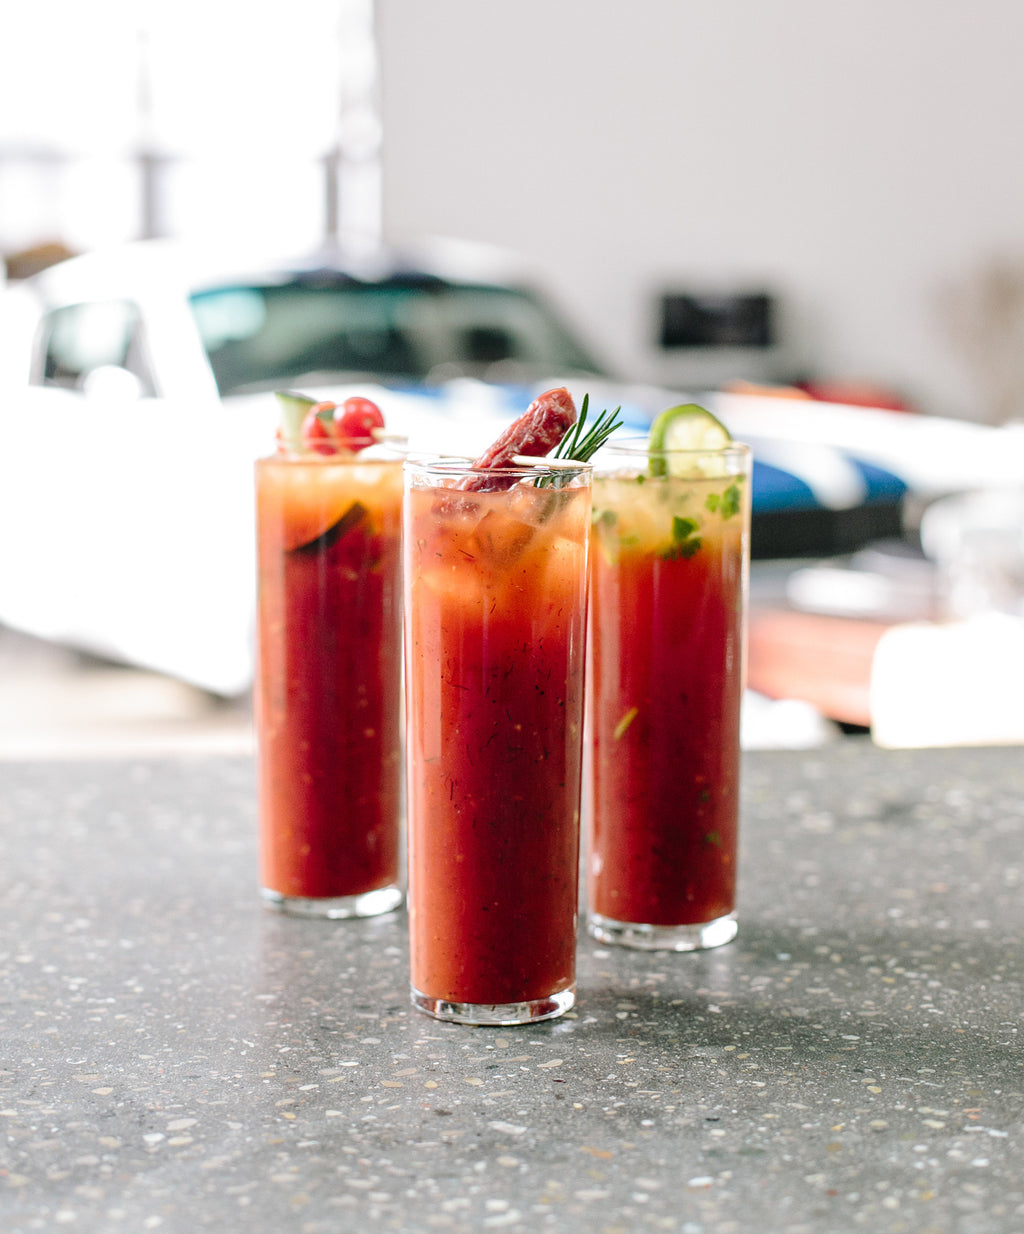 Vary your Mary: There’s more than one way to enjoy a bloody Mary